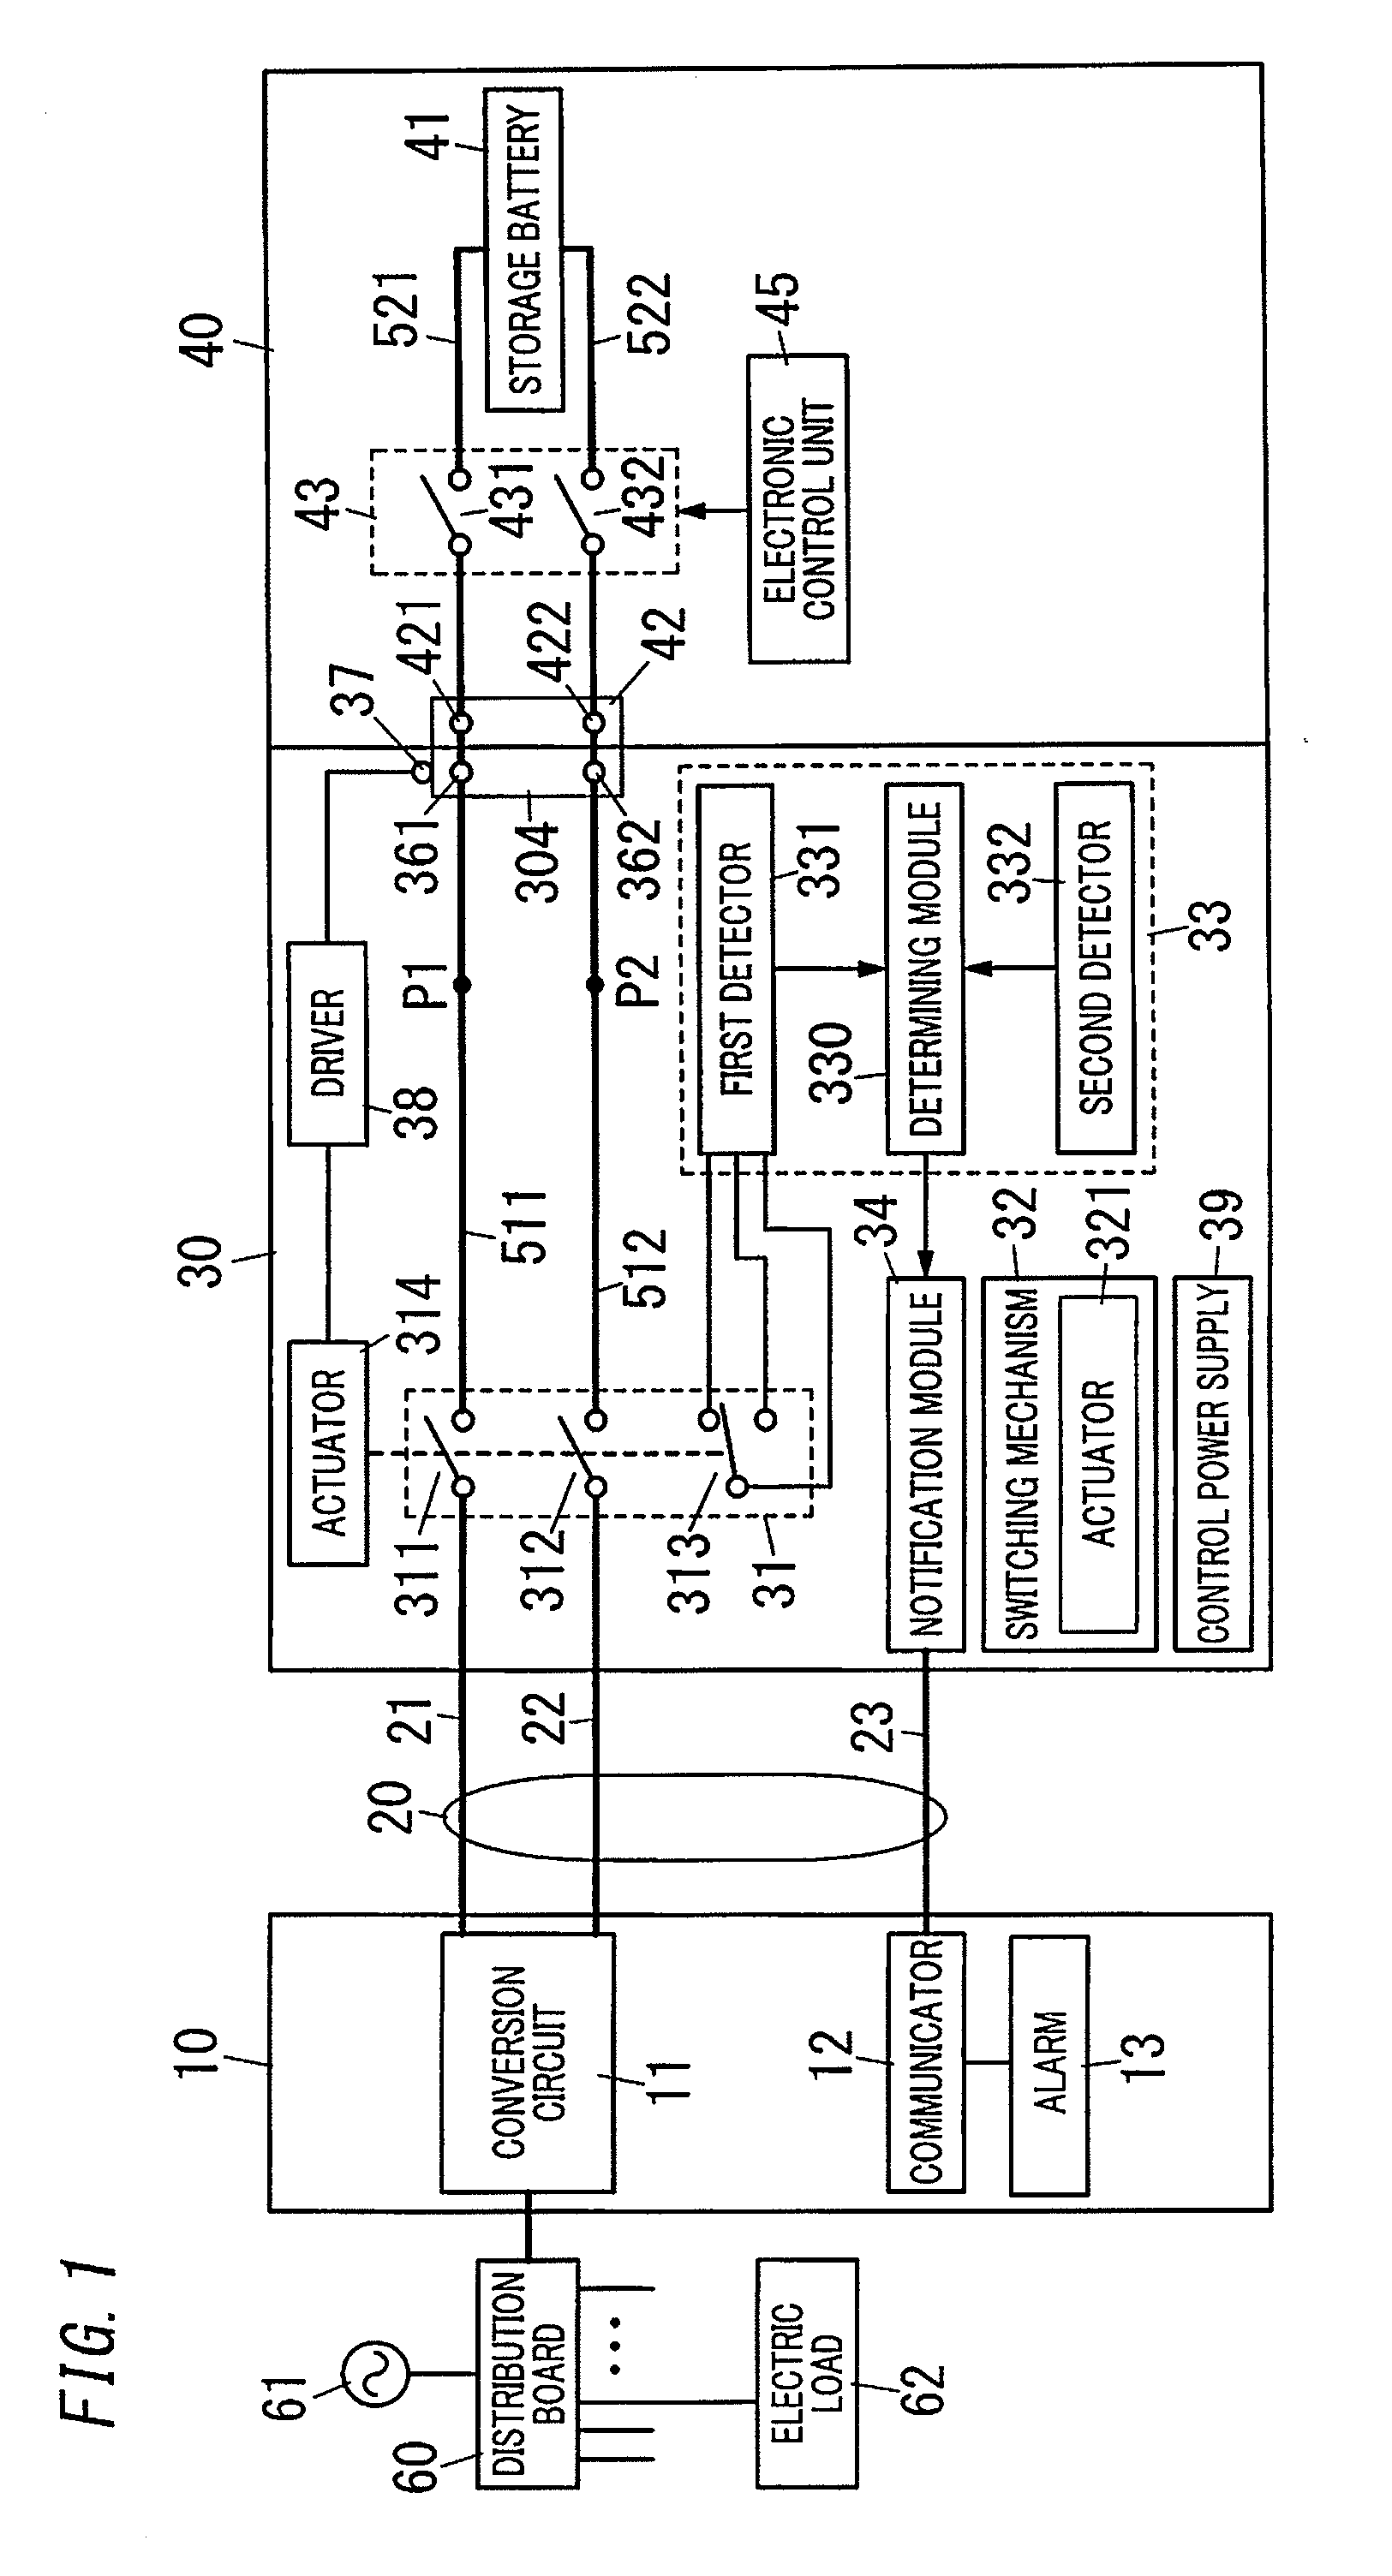 Power conversion system and connector